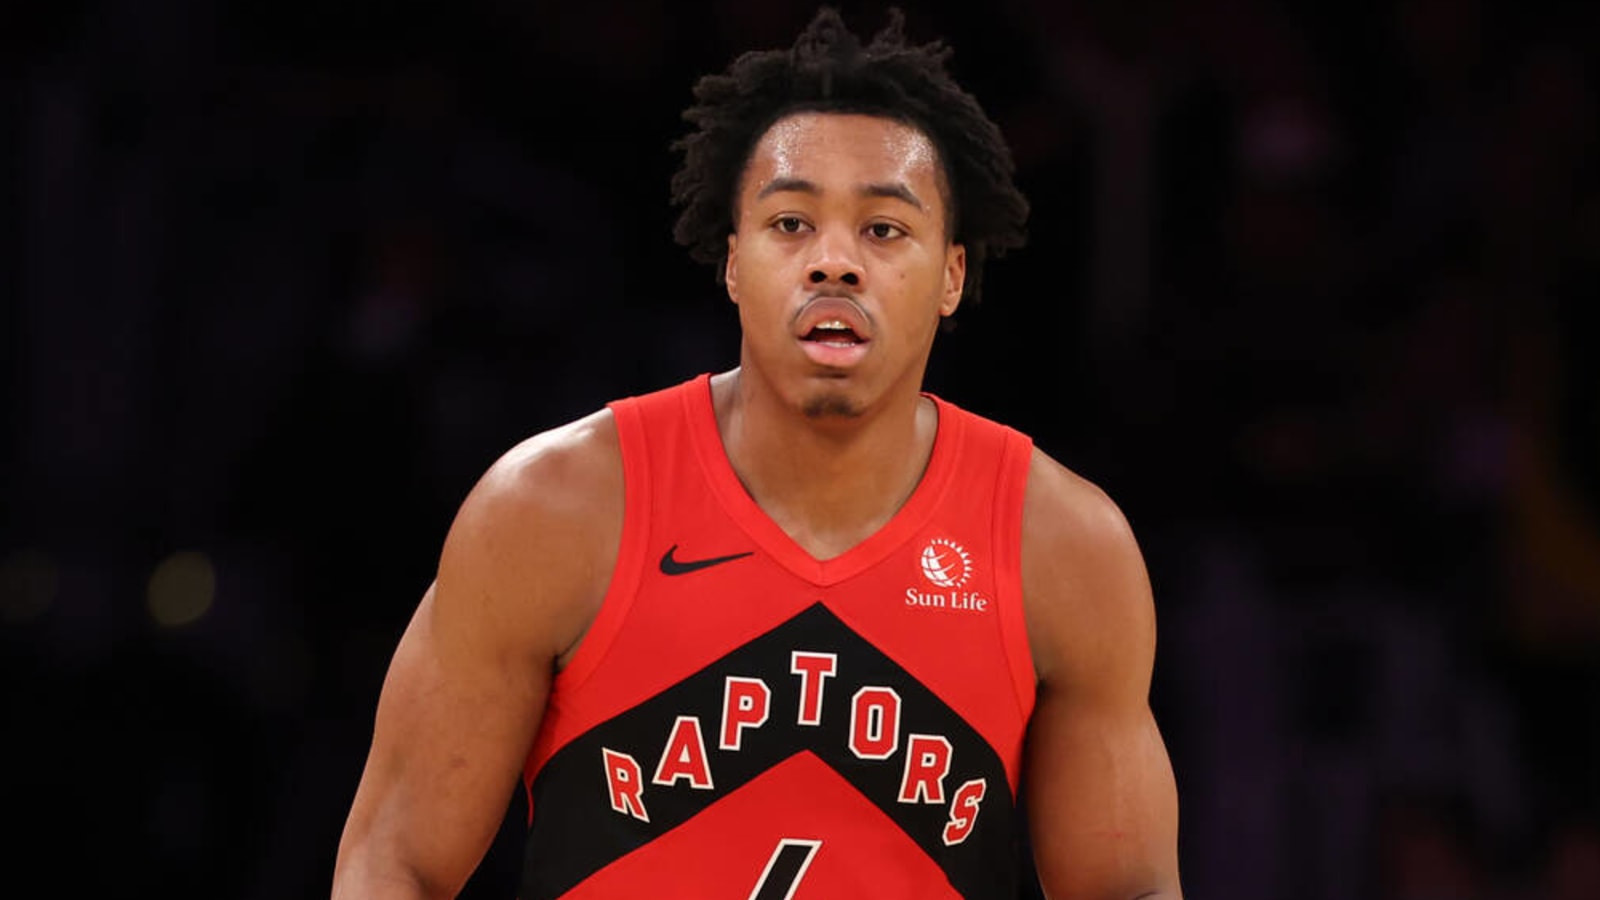 Raptors All-Star out indefinitely with serious injury